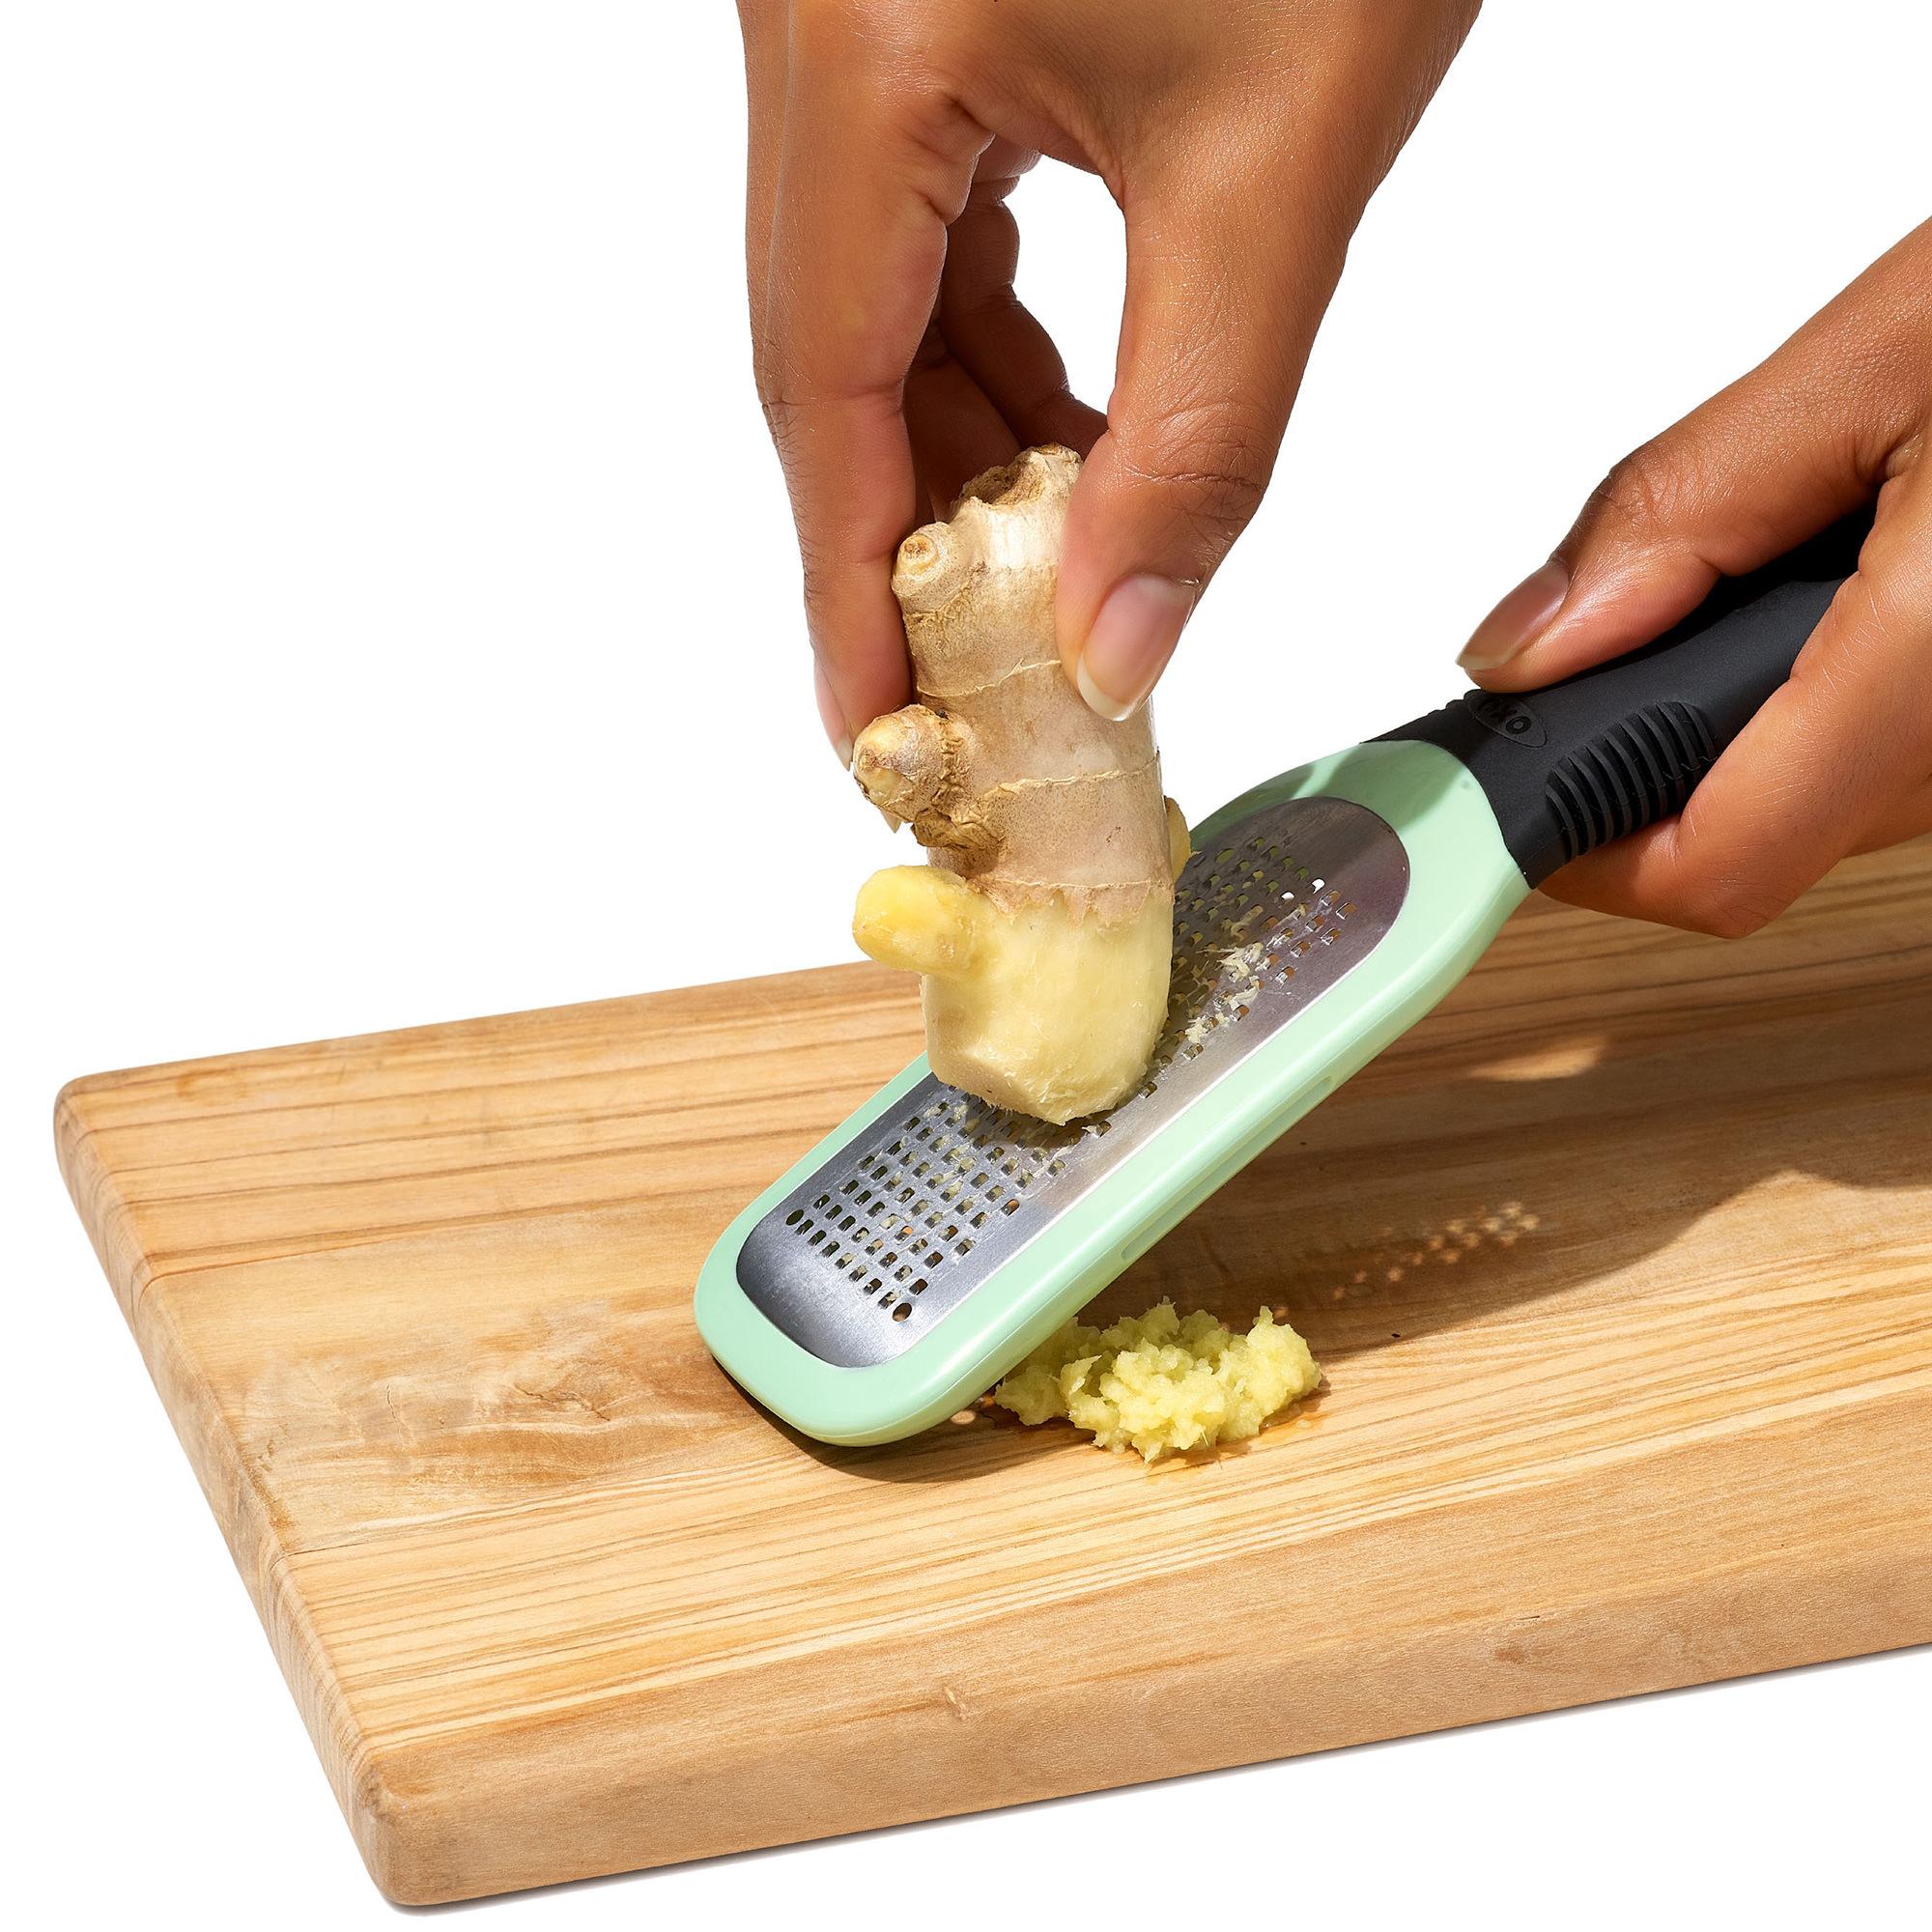 OXO Good Grips Etched Ginger & Garlic Grater Image 4